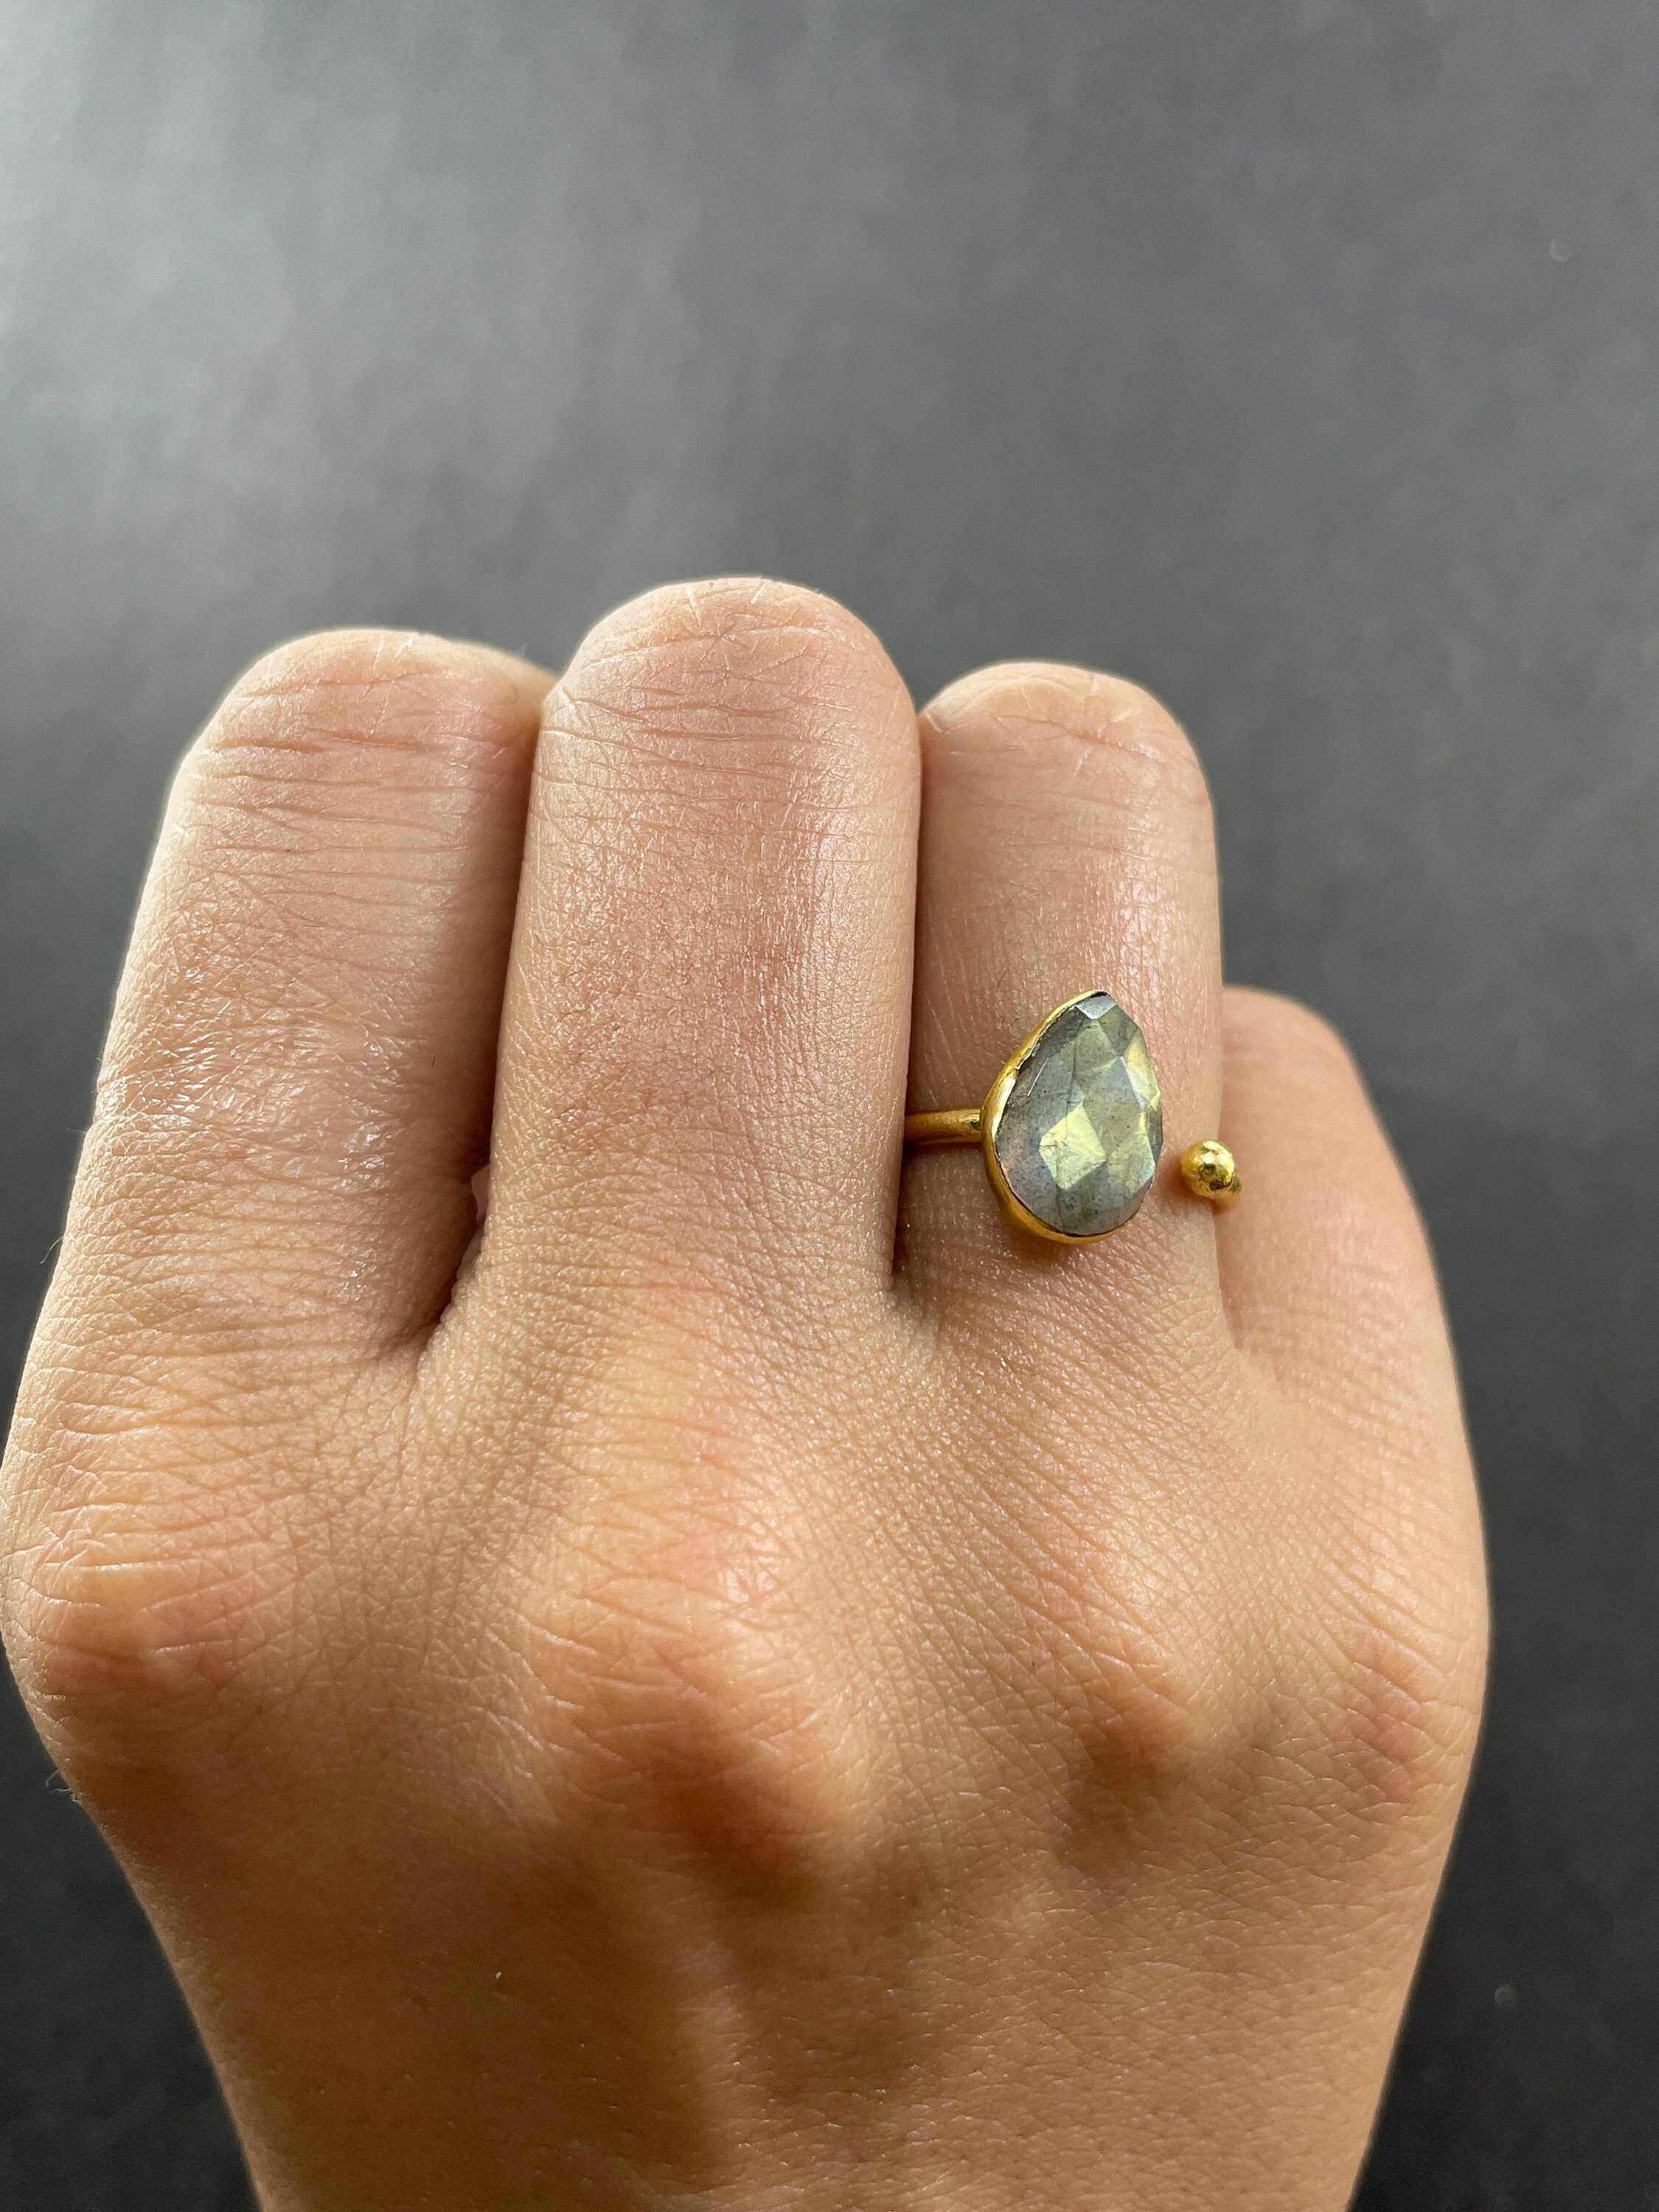 Natural Labradorite Gemstone Jewelry 18K Gold Plated 925 Sterling Silver Ring 